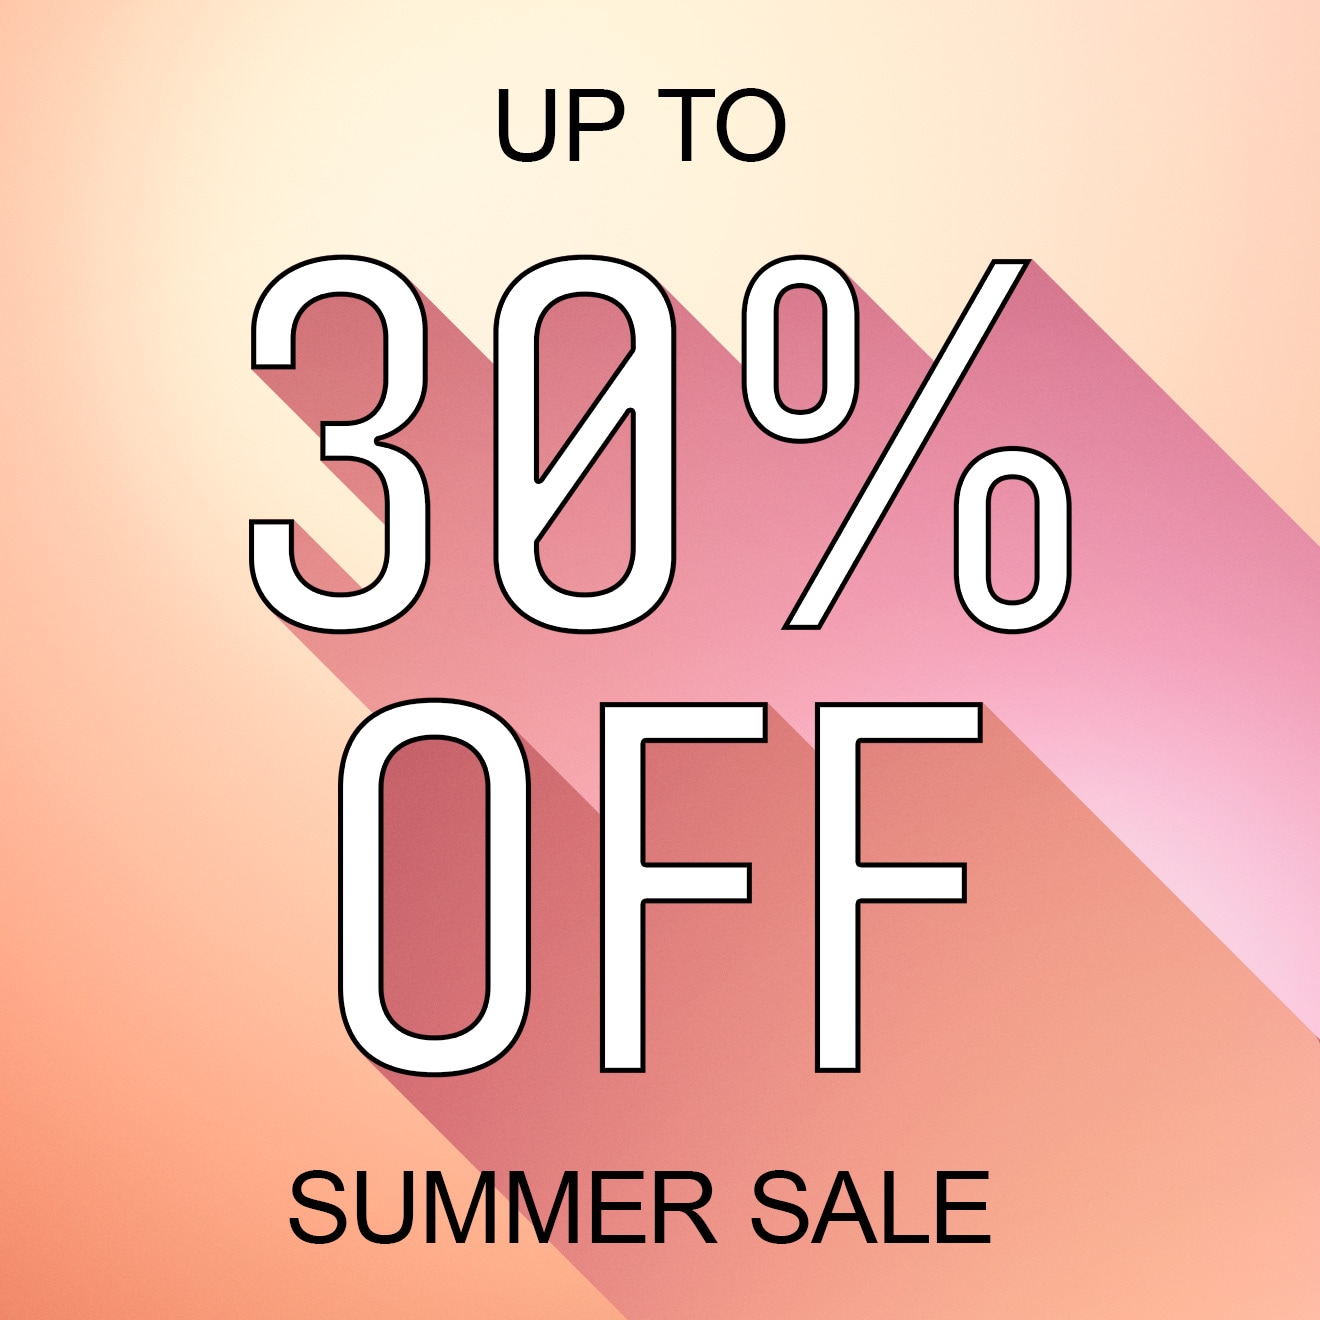 up to 30% off summer sale